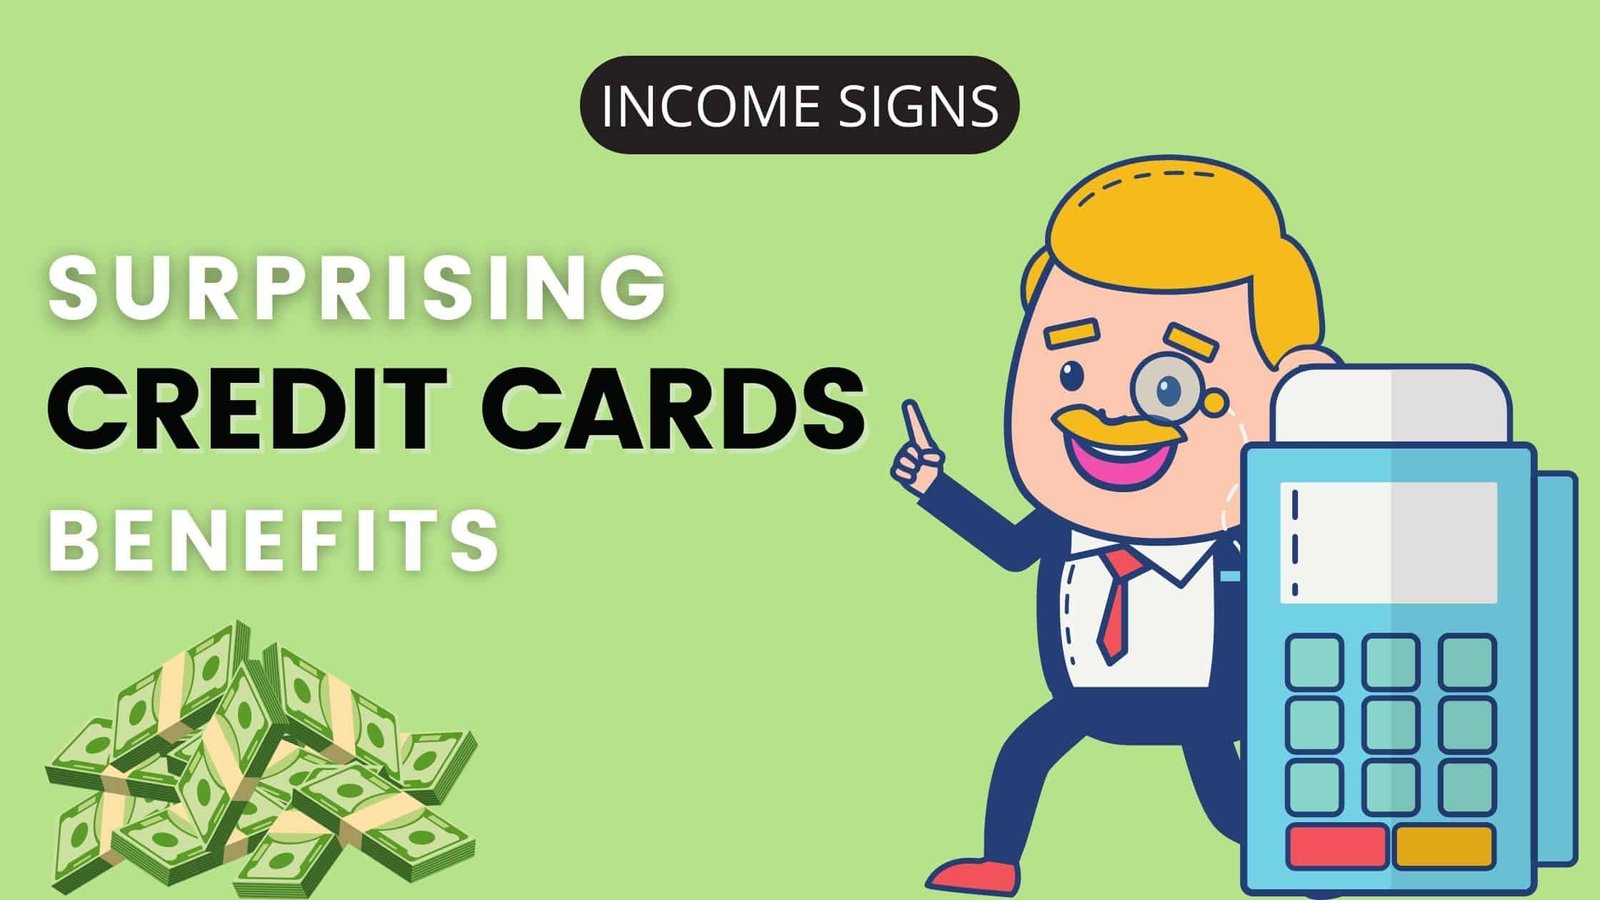 Benefits of using credit cards